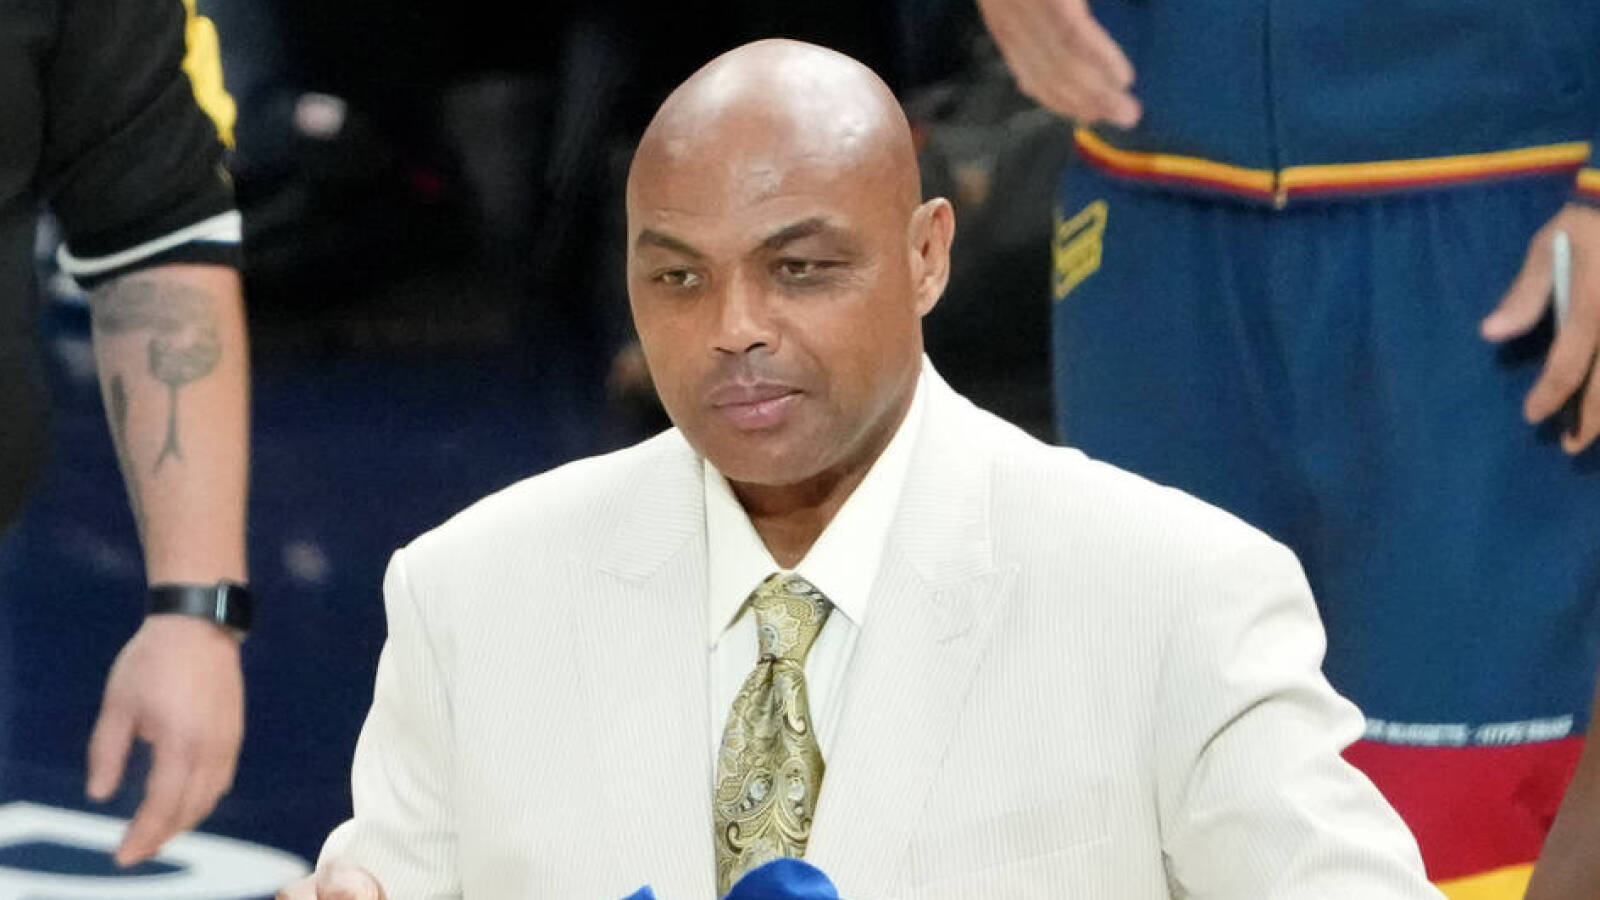 Charles Barkley makes admission about his 10-year TV contract